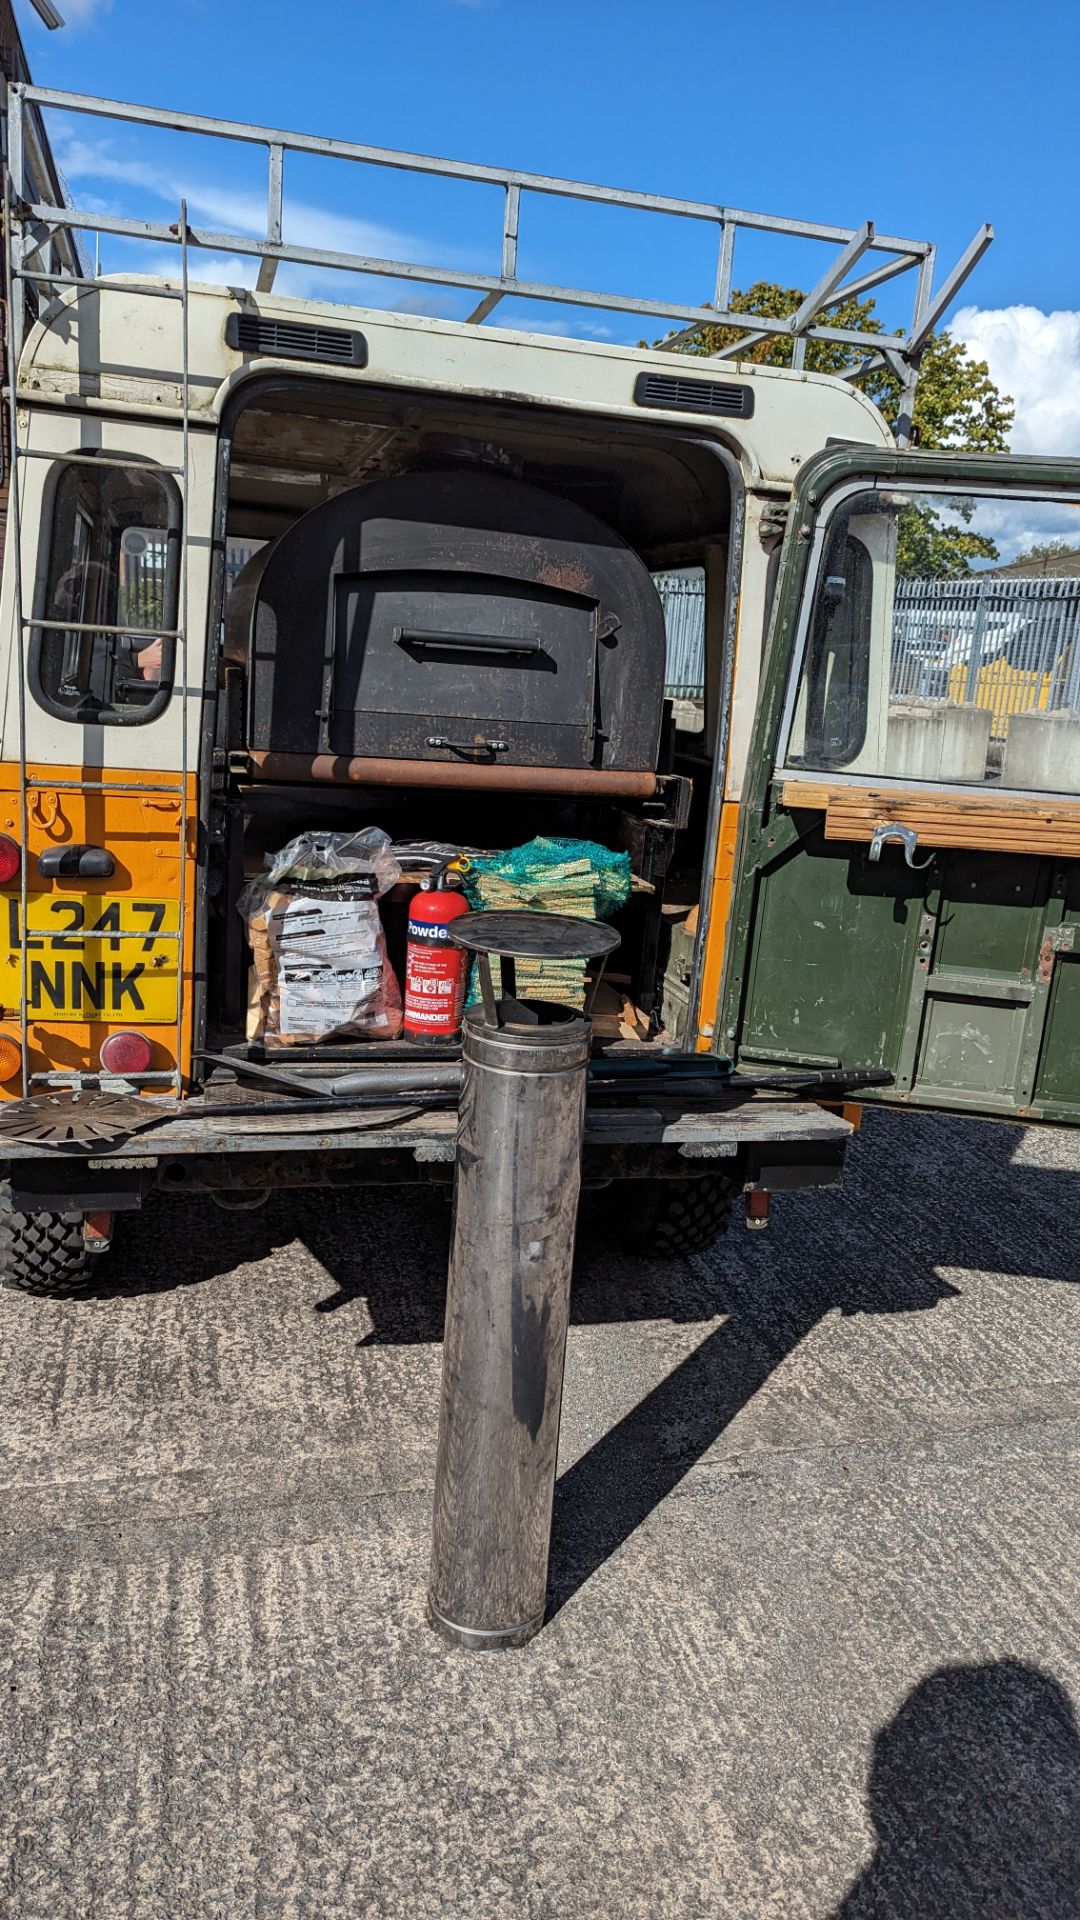 2003 Land Rover 110 Defender 4C Diesel with wood fired pizza oven - Image 17 of 48